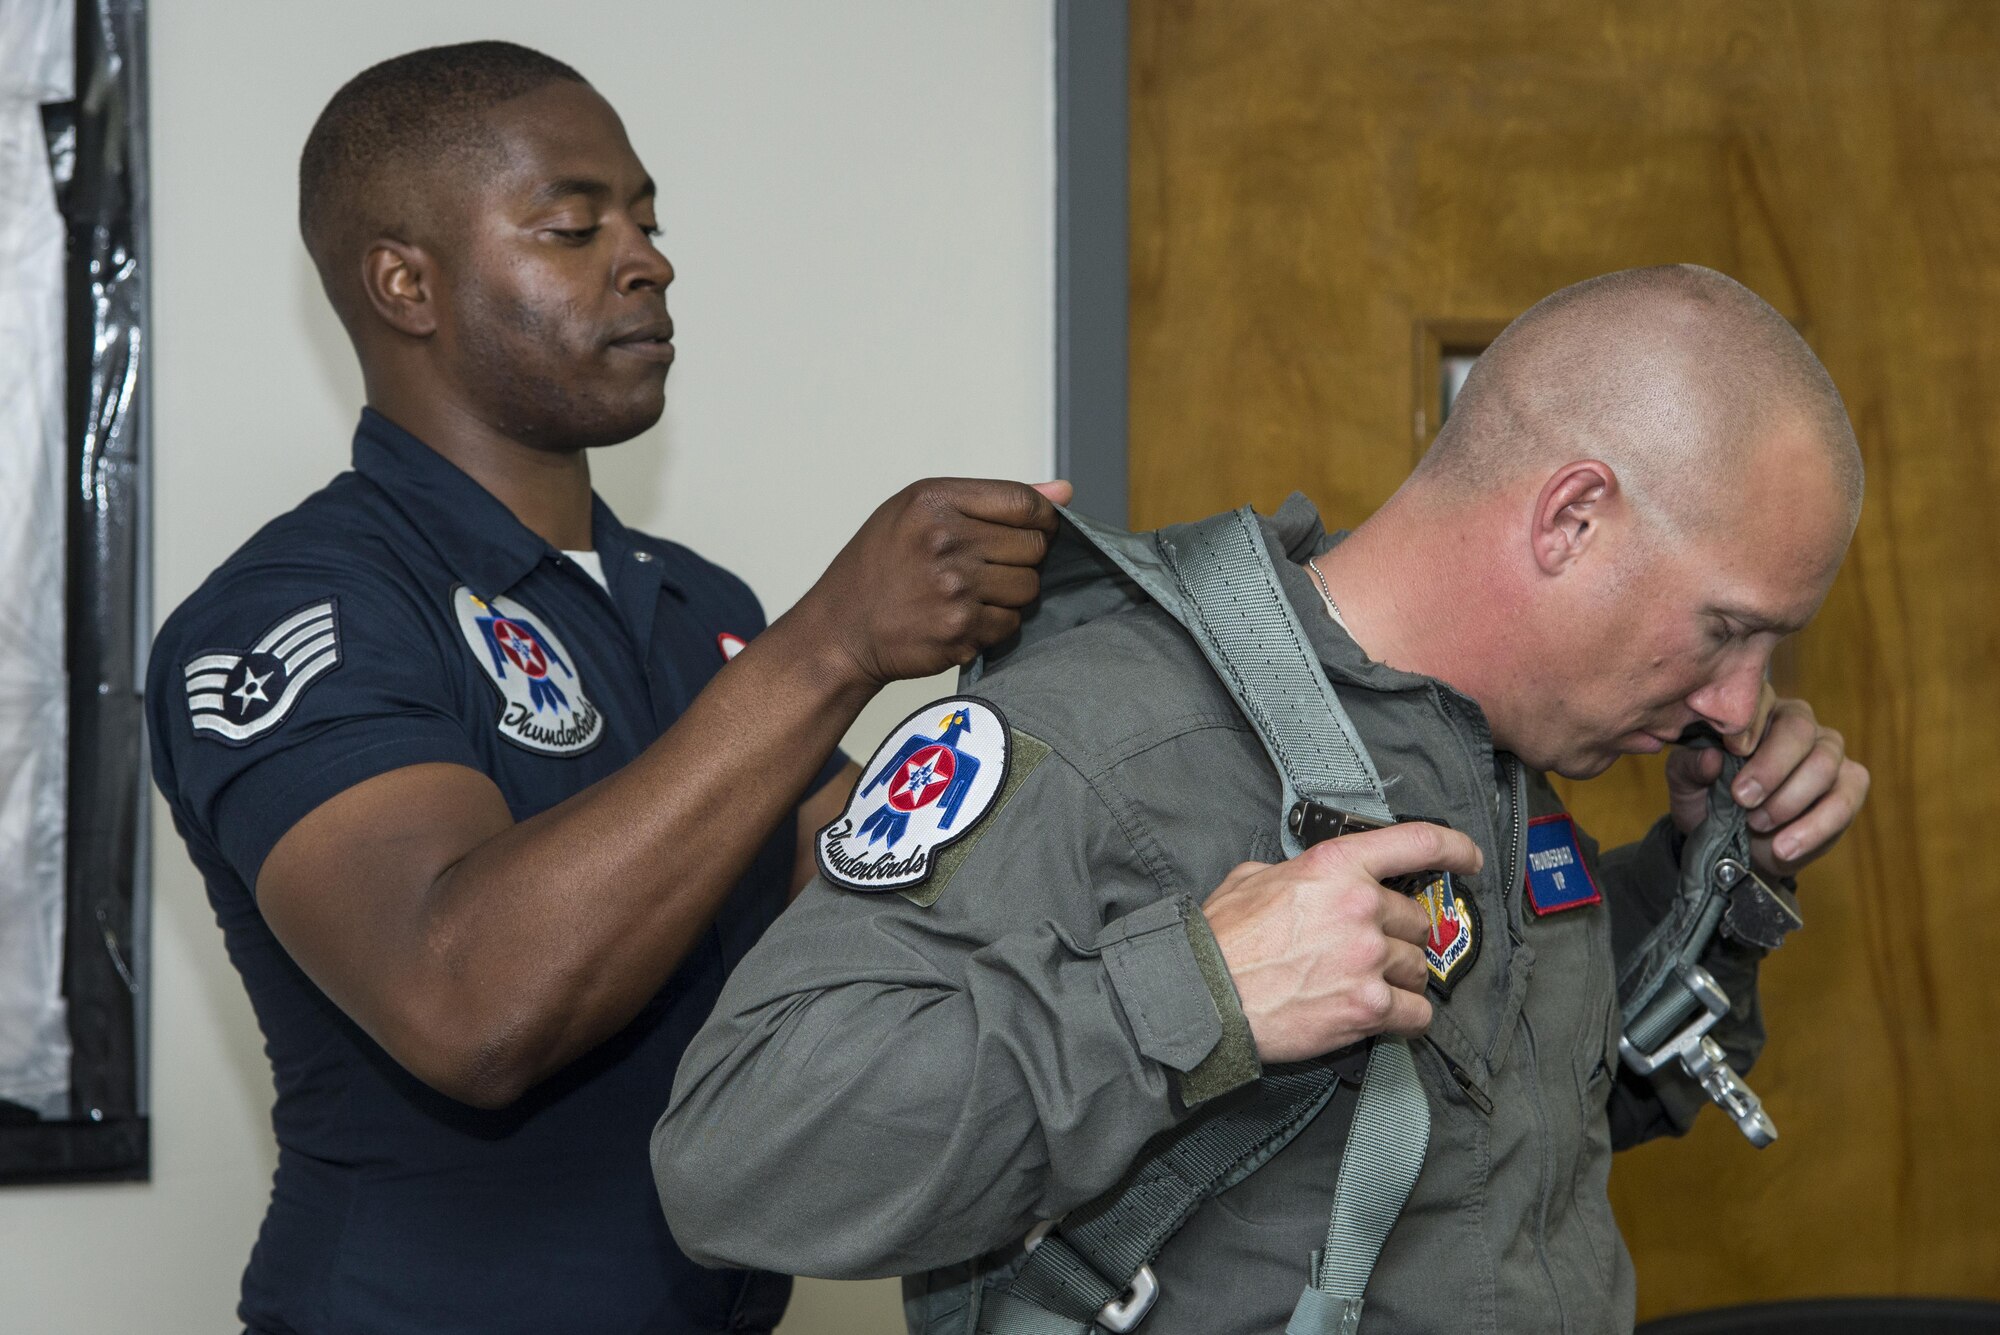 Staff Sgt. Jasper Roberts, U.S. Air Force Aerial Demonstration Squadron “Thunderbirds” aircrew flight equipment craftsman, helps Air Force Master Sgt. Benjamin Seekell, 343rd Training Squadron security forces apprentice course flight chief and Air Force Wounded Warrior, don a flight suite Nov. 2, 2017, at Joint Base San Antonio-Kelly Field, Texas.  Seekell was selected to fly with the Thunderbirds before they headline the 2017 Joint Base San Antonio Air Show and Open House Nov. 4-5. (U.S. Air Force photo by Senior Airman Stormy Archer)